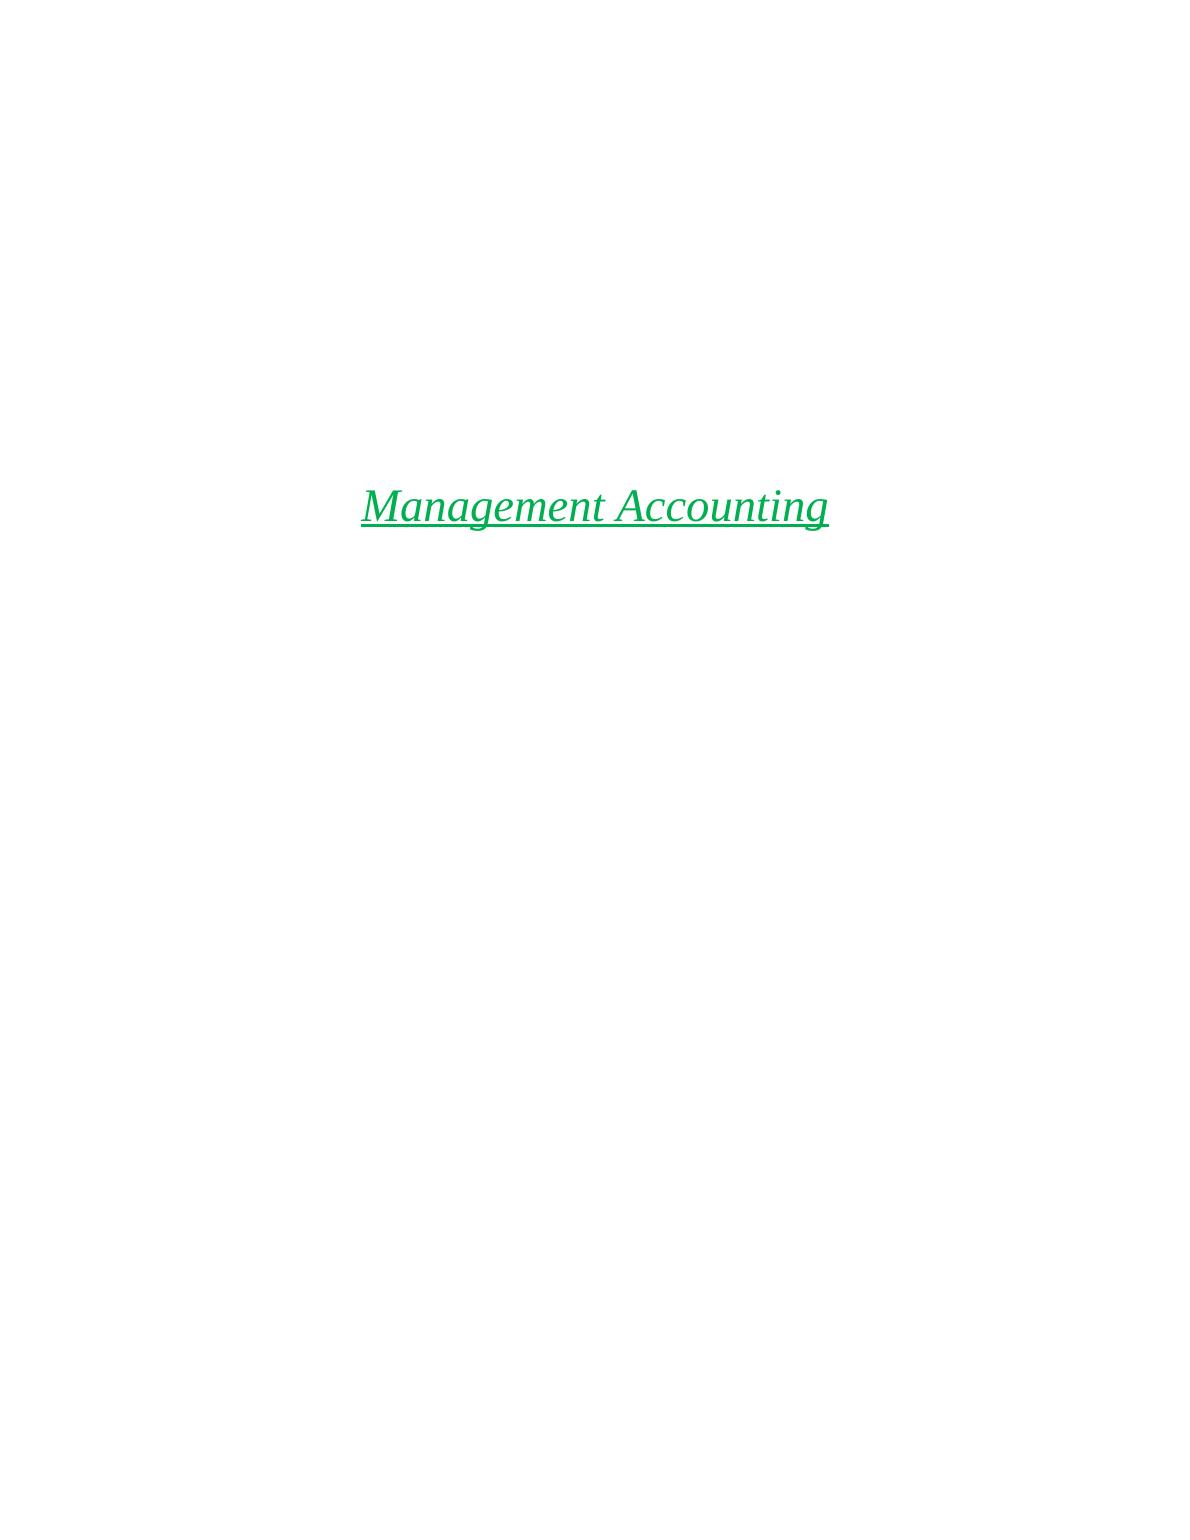 Management Accounting: Systems, Reporting, and Cost Analysis_1